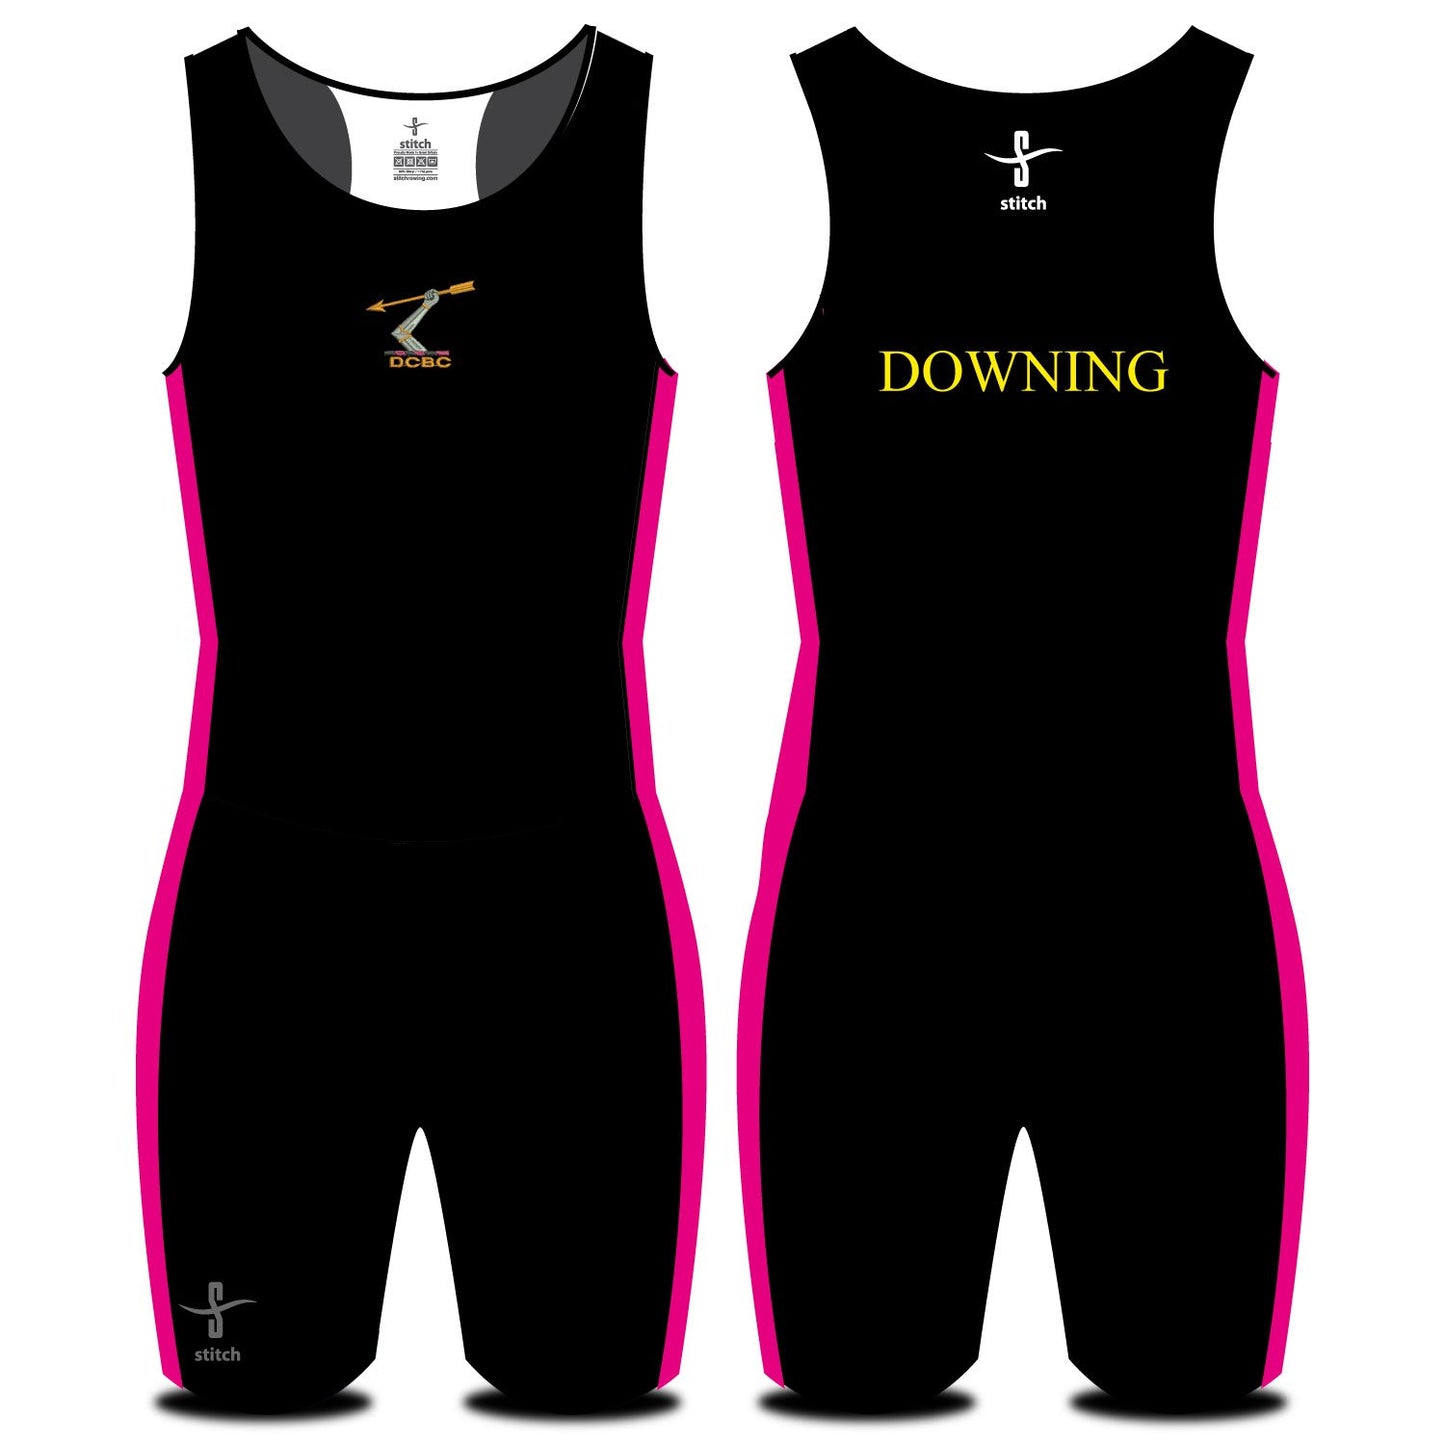 Downing AIO Men's